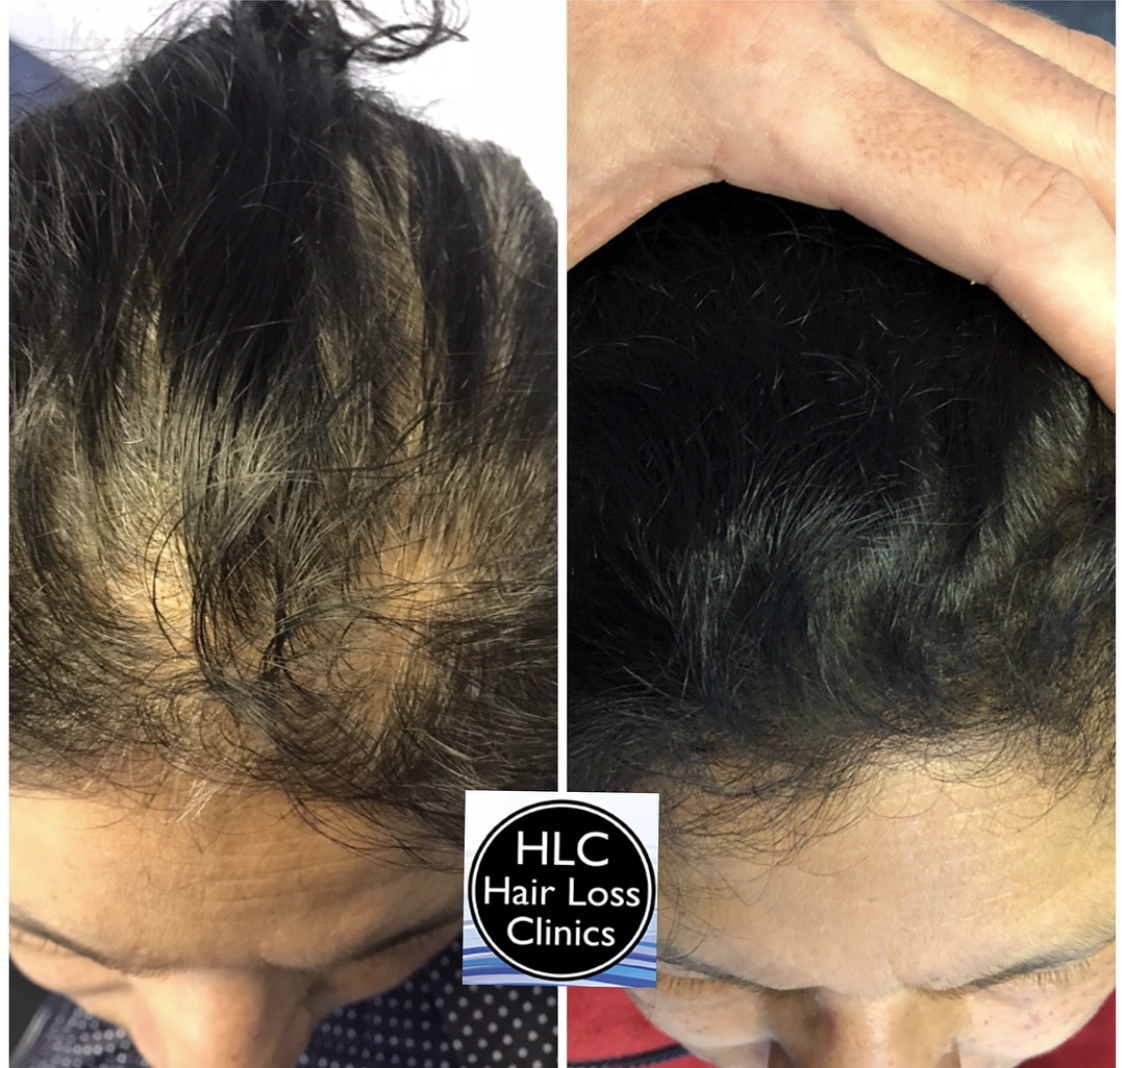 Hair Fall Treatment in Lahore - Aestheticare - Hair loose Clinic